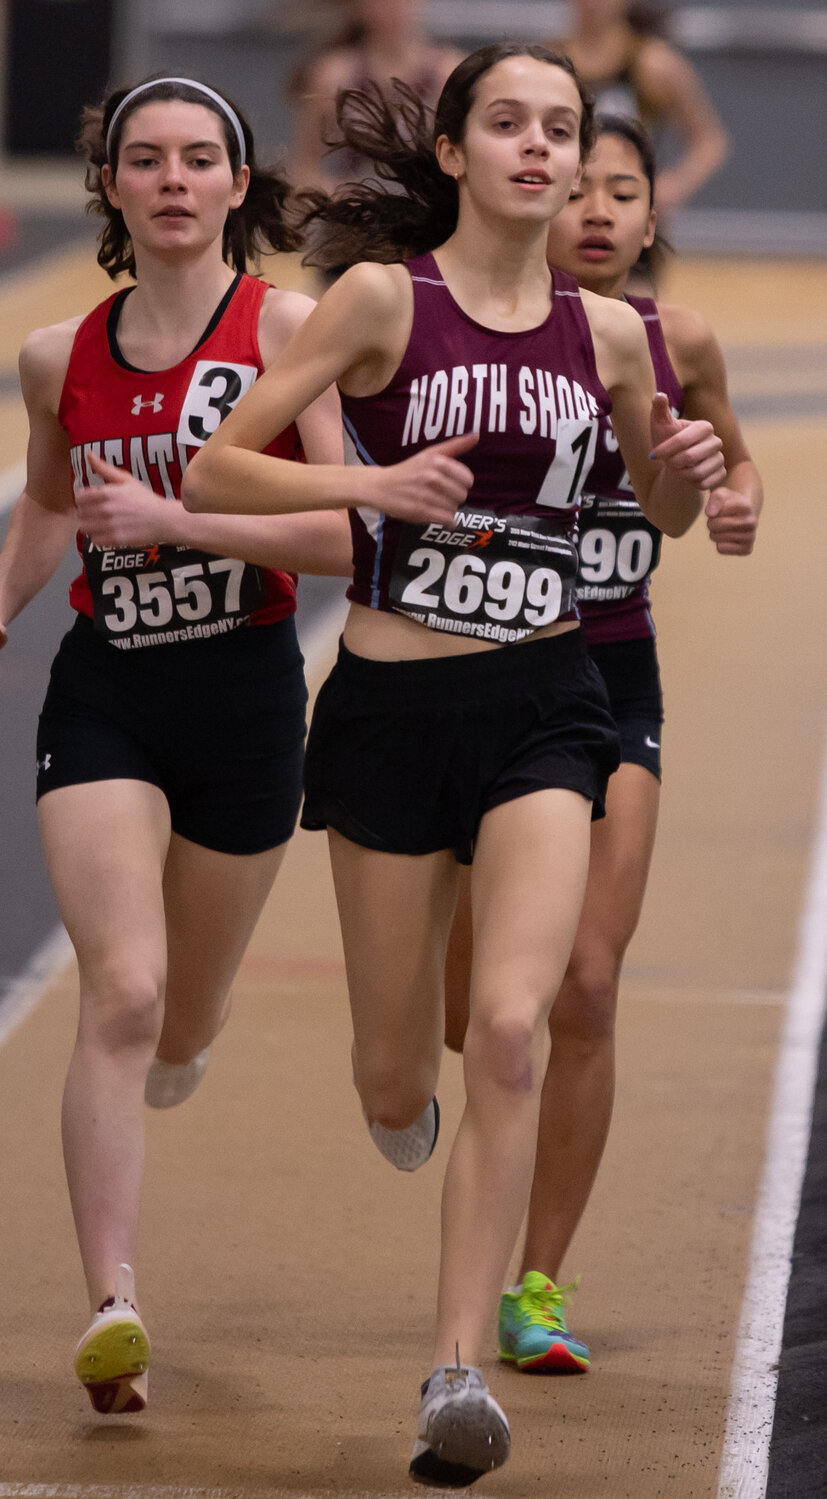 North Shore sophomore Joanna Kenney won the Nassau Class C title in the 3000-meter run with a time of 10 minutes, 32.55 seconds.